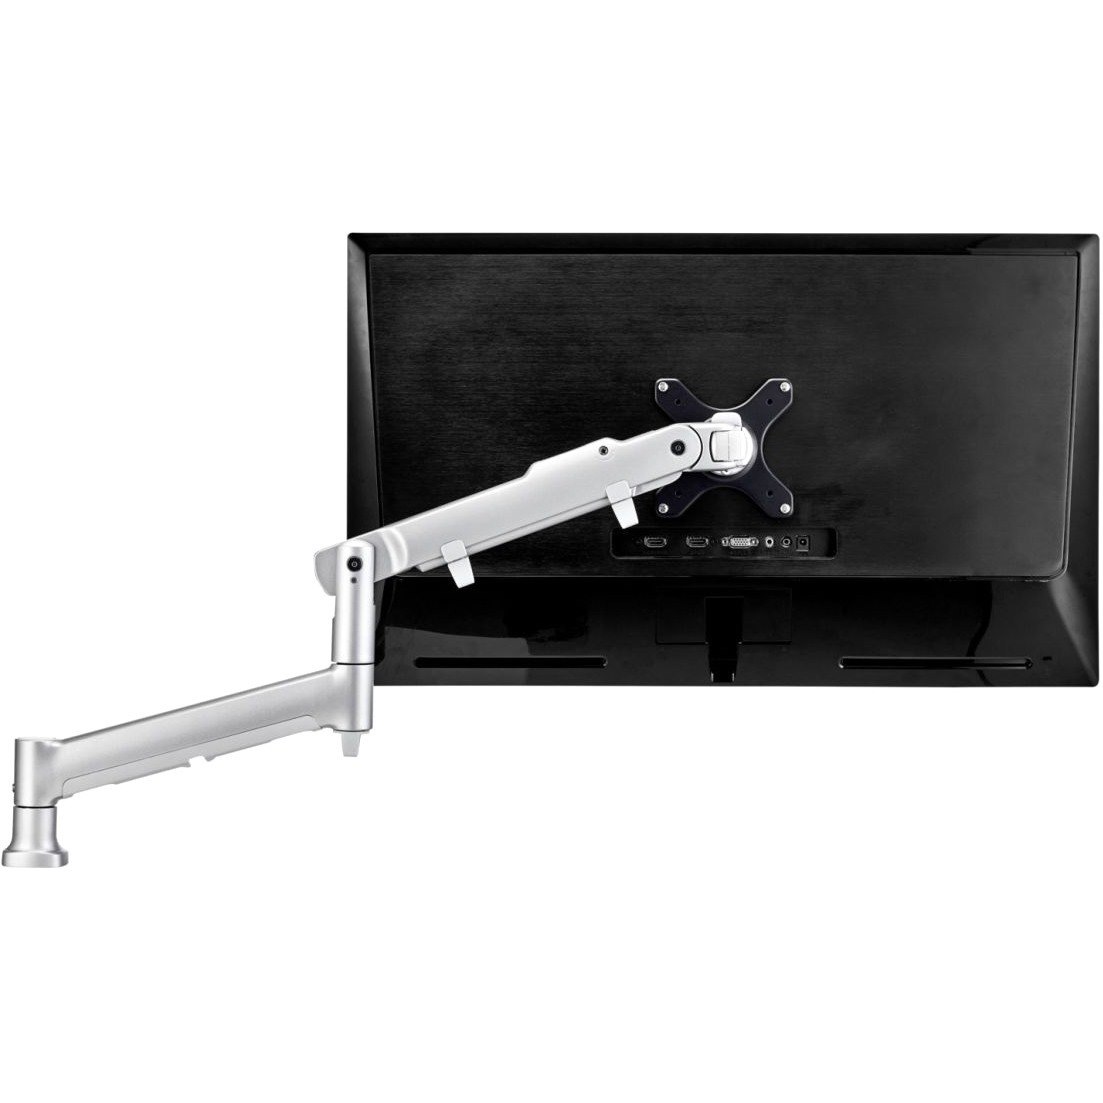 Atdec AWMS-DB Mounting Arm for Display, Curved Screen Display, Flat Panel Display, Monitor - Silver